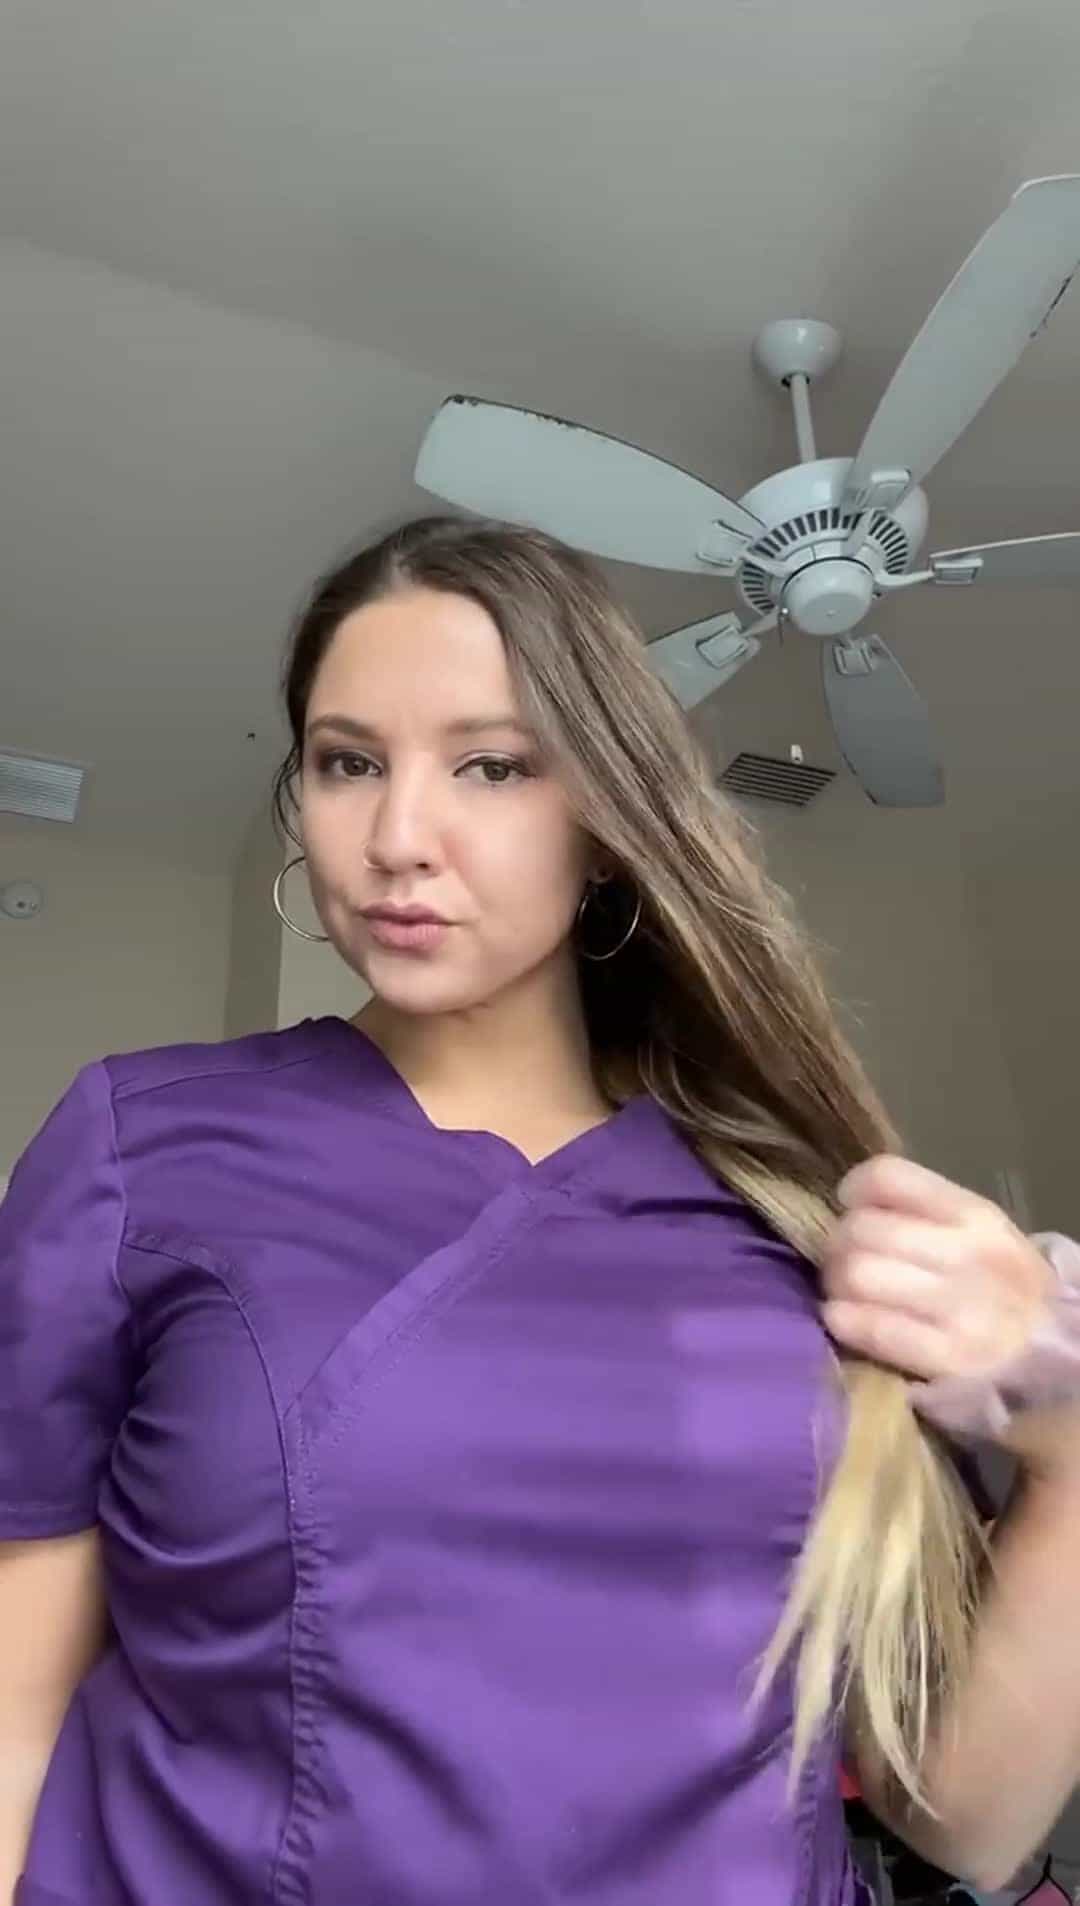 First date idea: Blowjob in the hospital during my shift, yay or nay?👩‍⚕️🥵